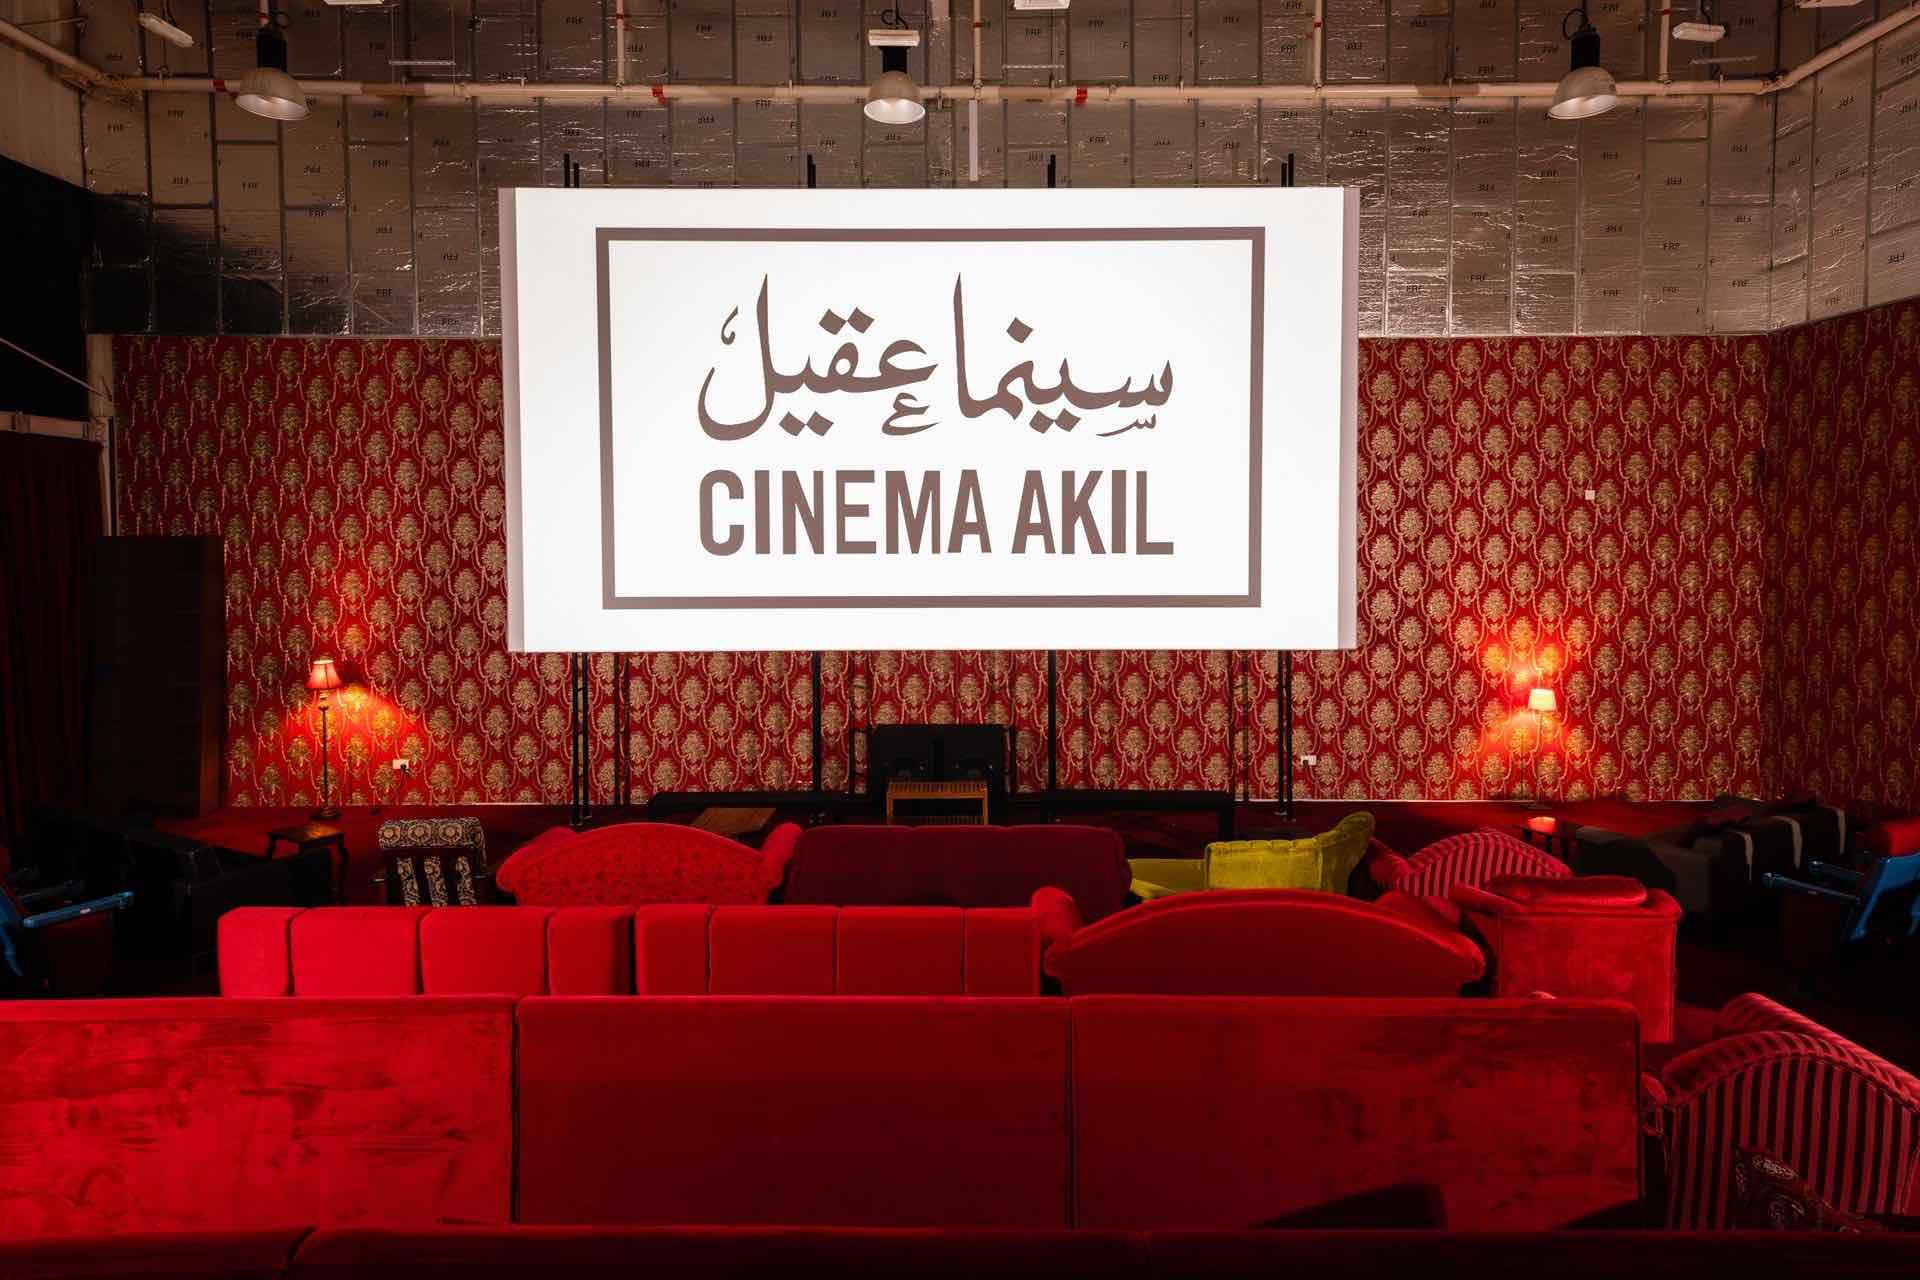 Cinema Akil prepares for a second act at 25hours Hotel Dubai One Central